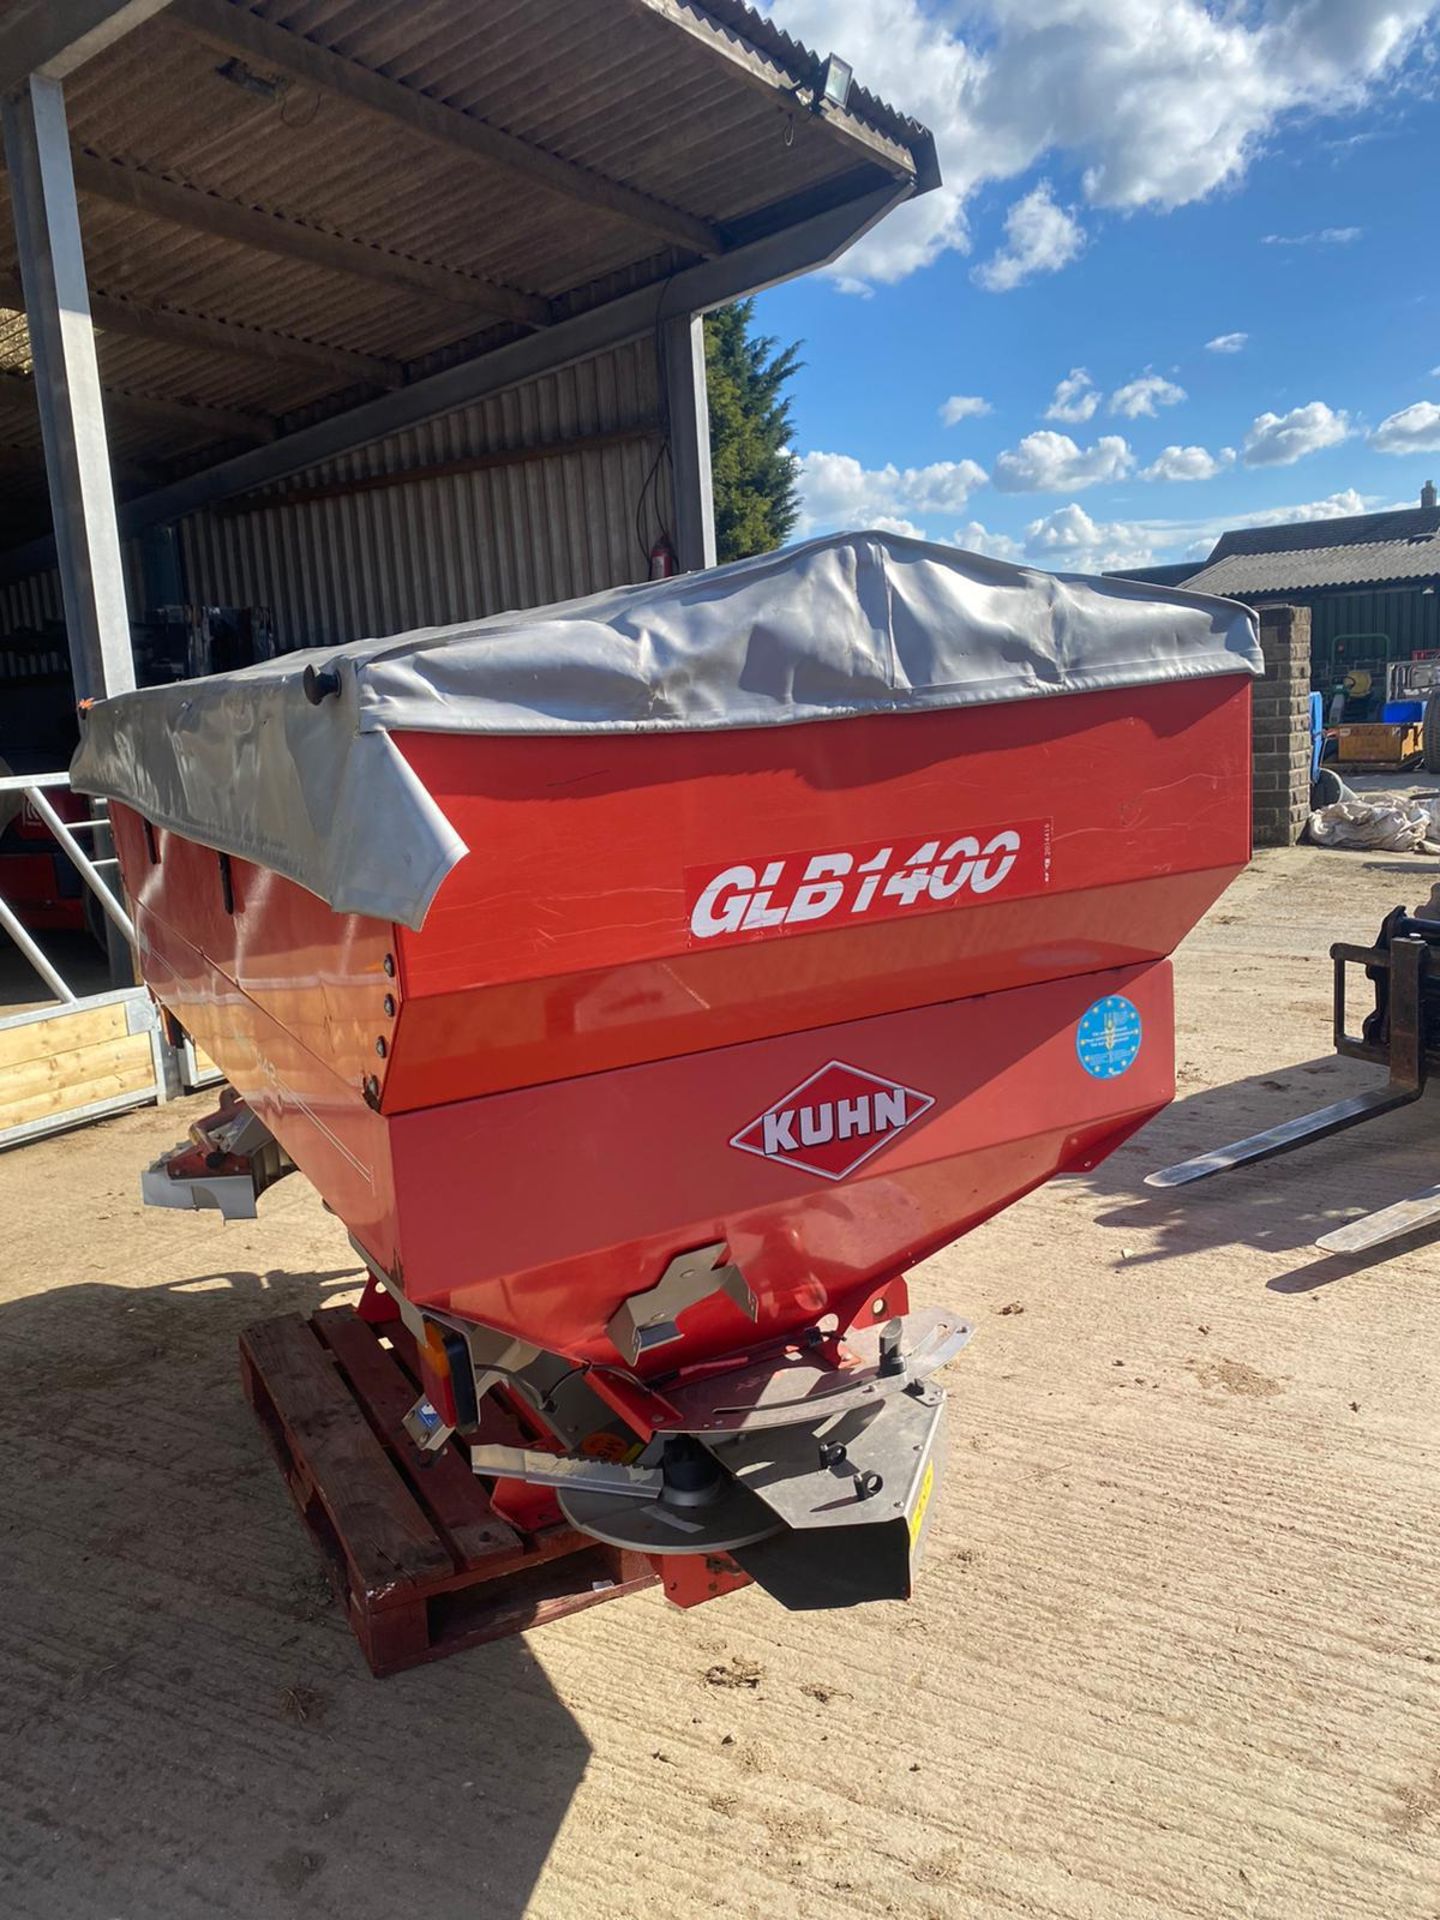 KUHN GLB1400 FERTILISER SPREADER SPINNER, IN WORKING CONDITION, COMES WITH PTO READY TO USE *NO VAT* - Image 2 of 7